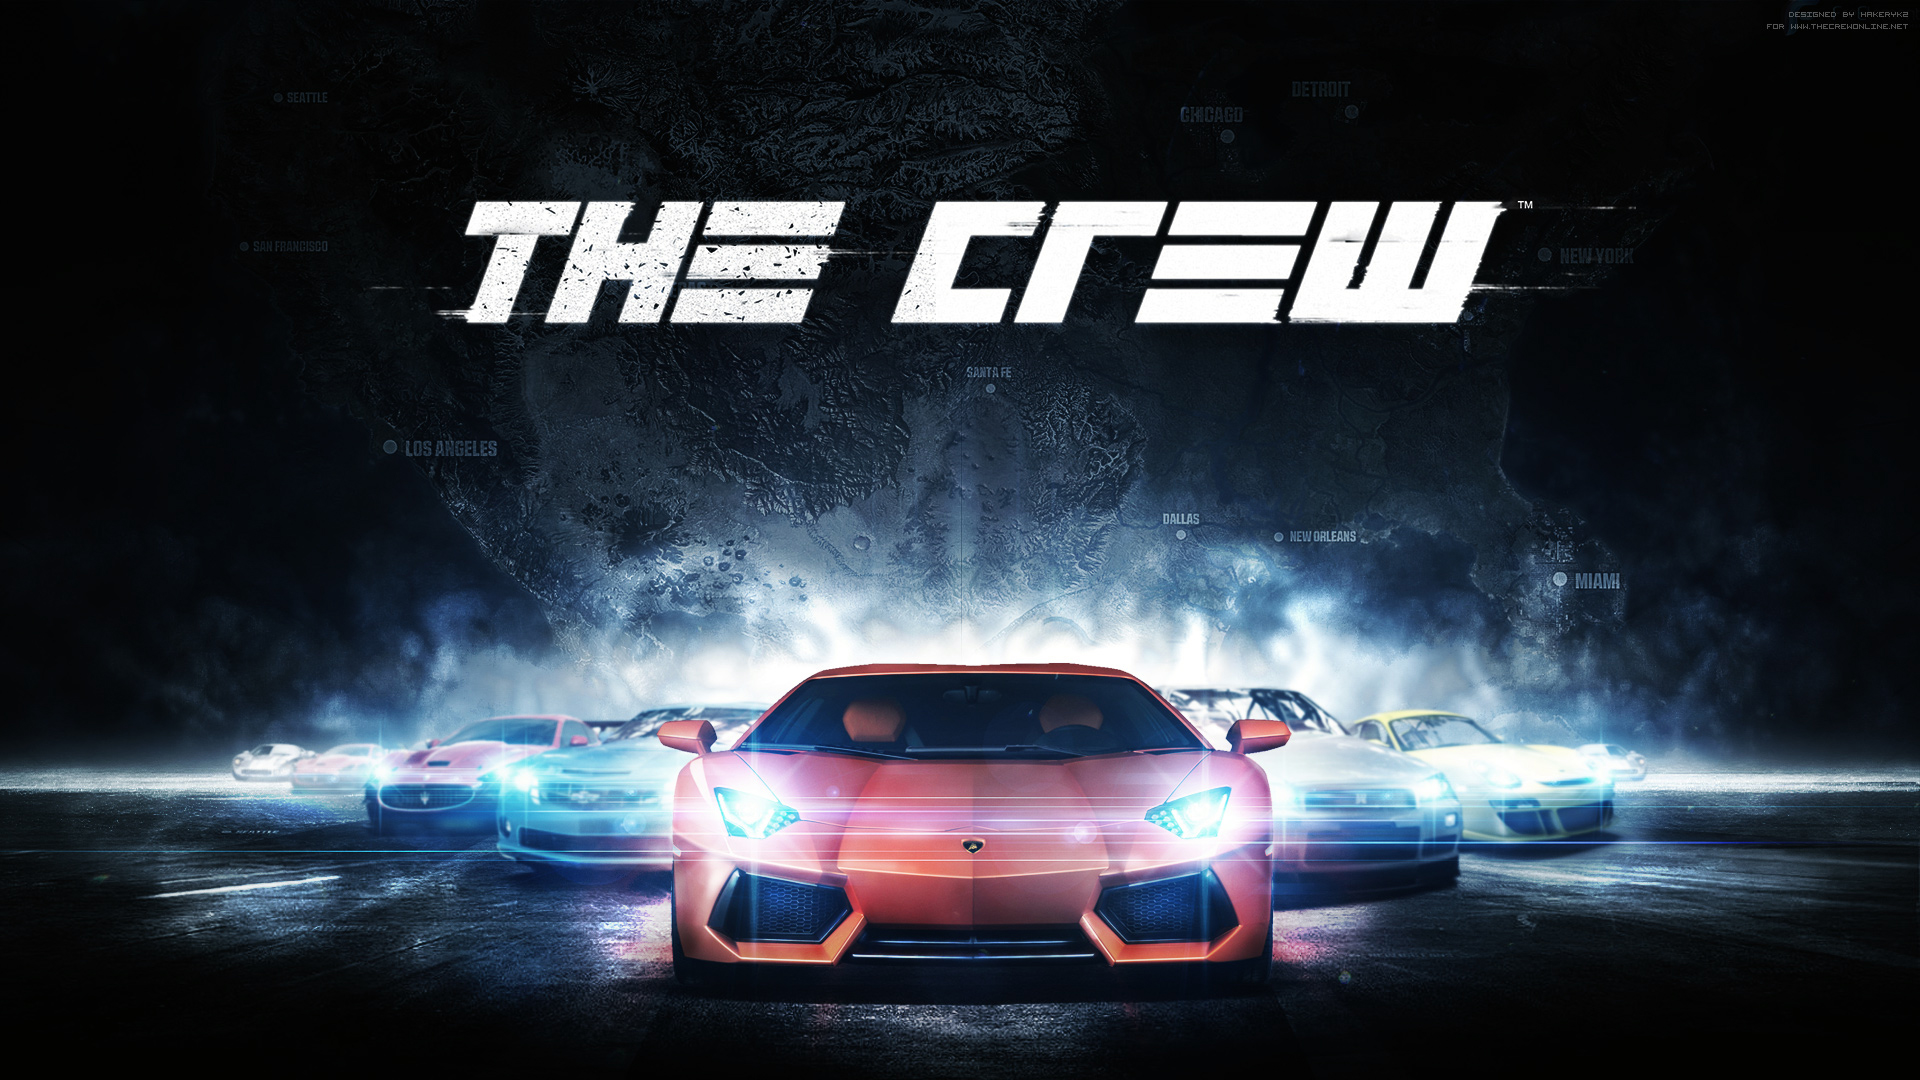 “The Crew” Pushed to December